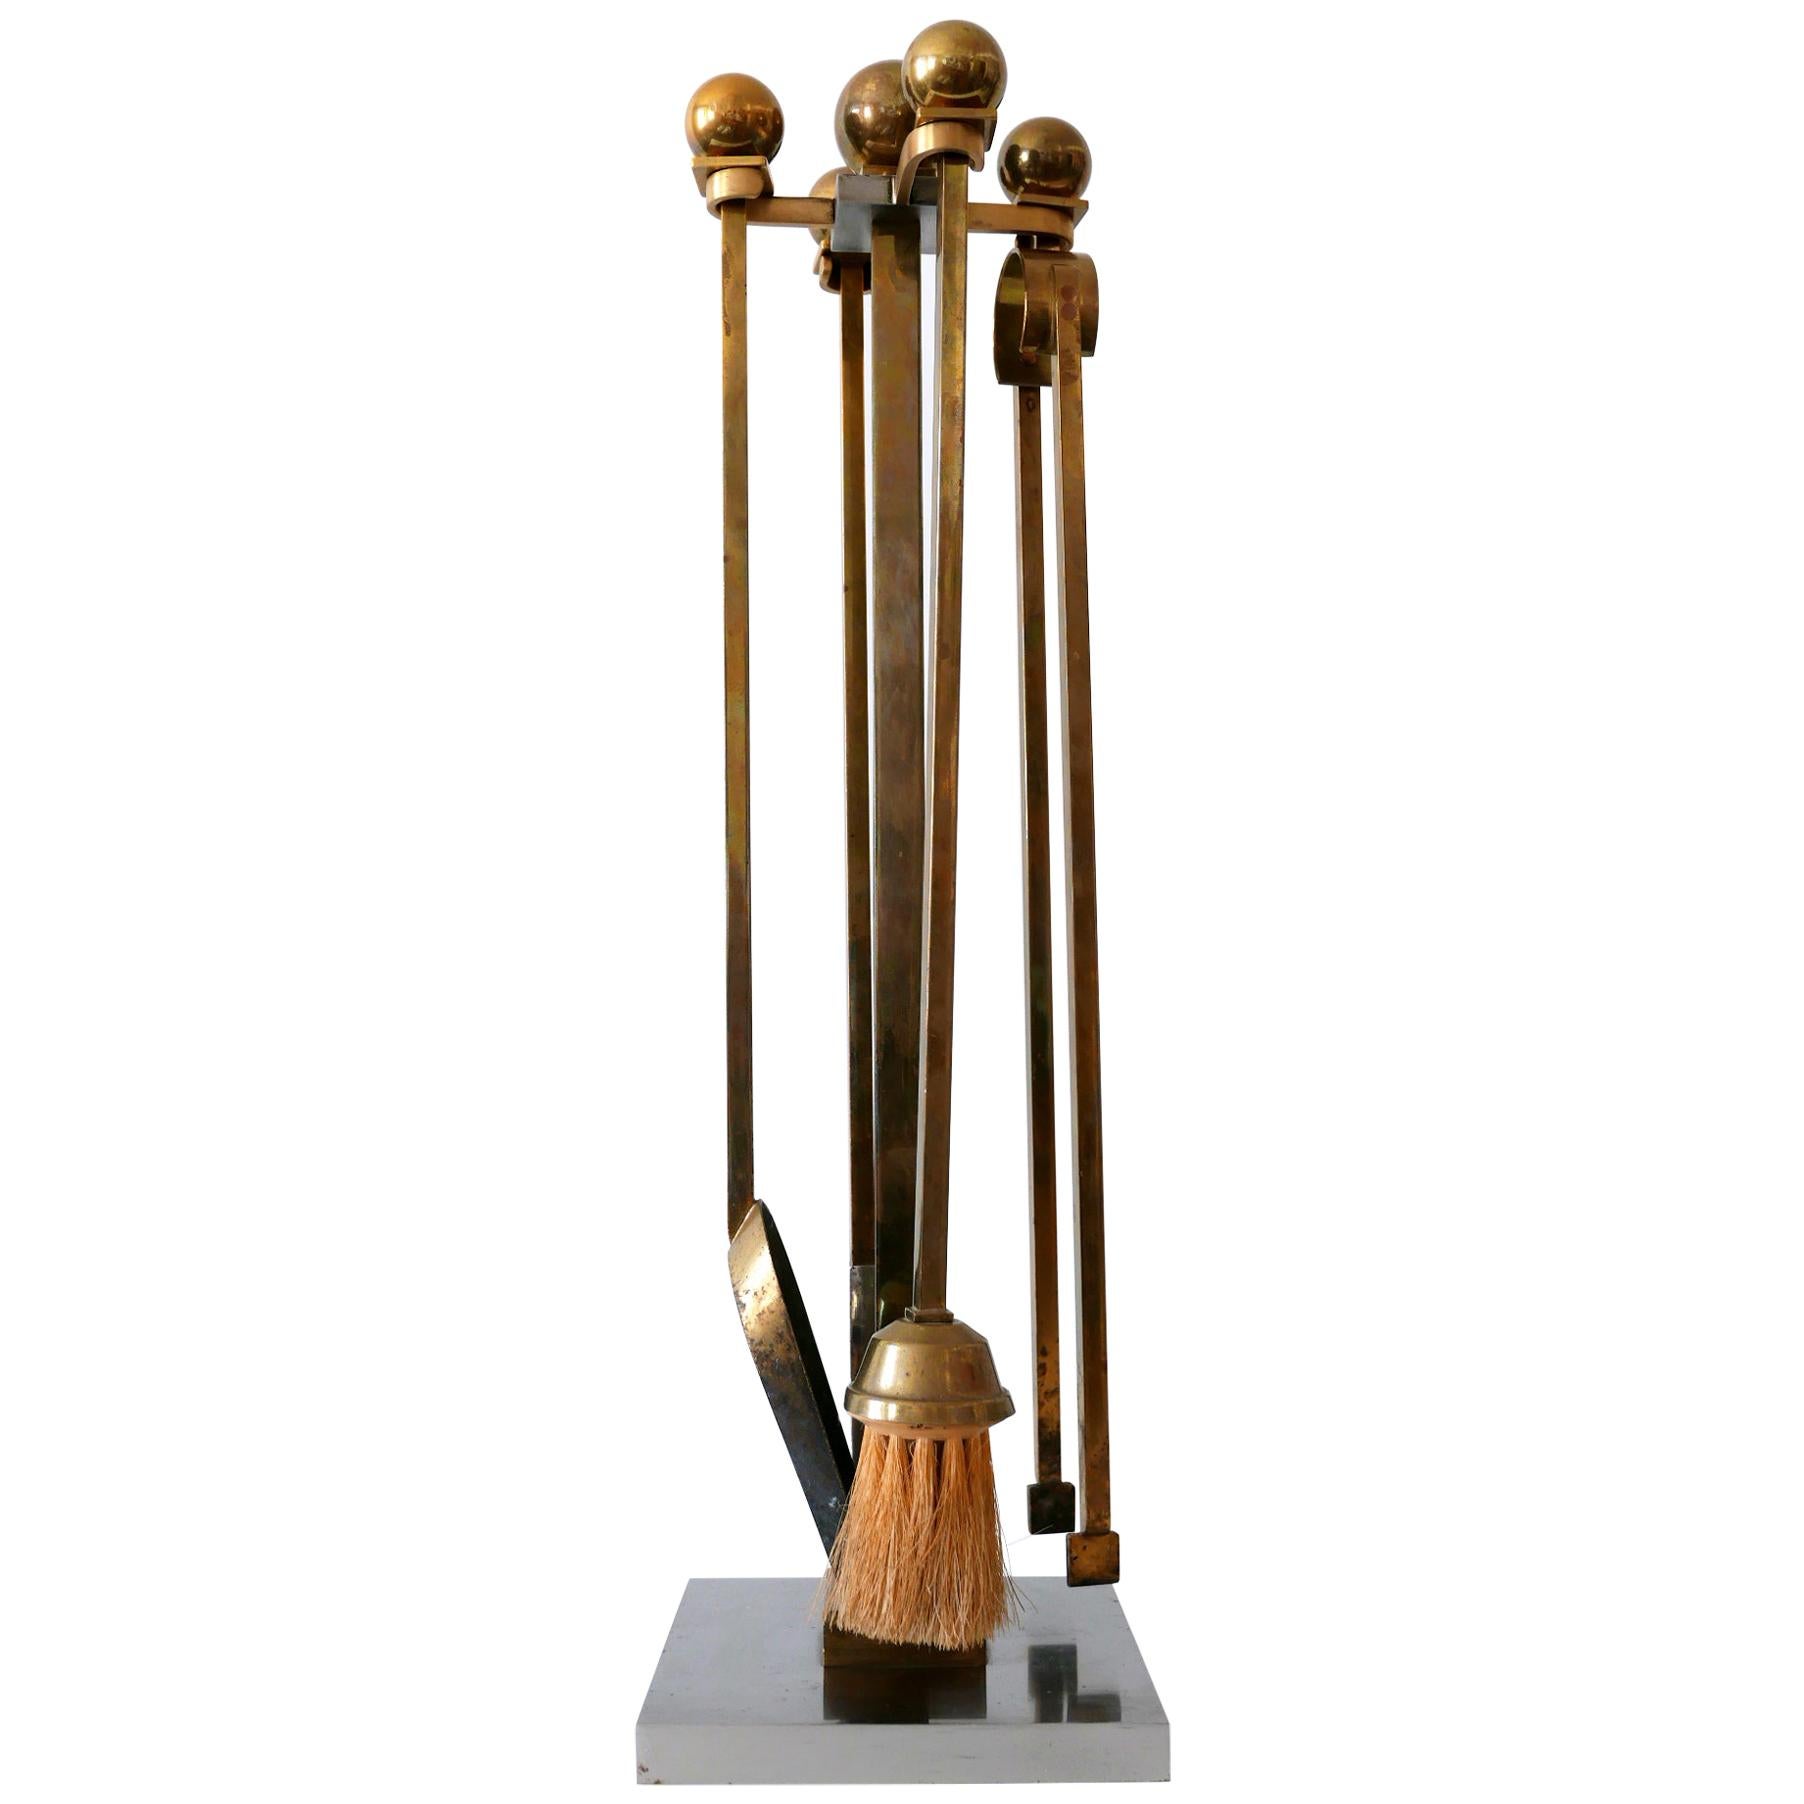 Exceptional Mid-Century Modern Brass and Steel Fireplace Tools 1970s For Sale